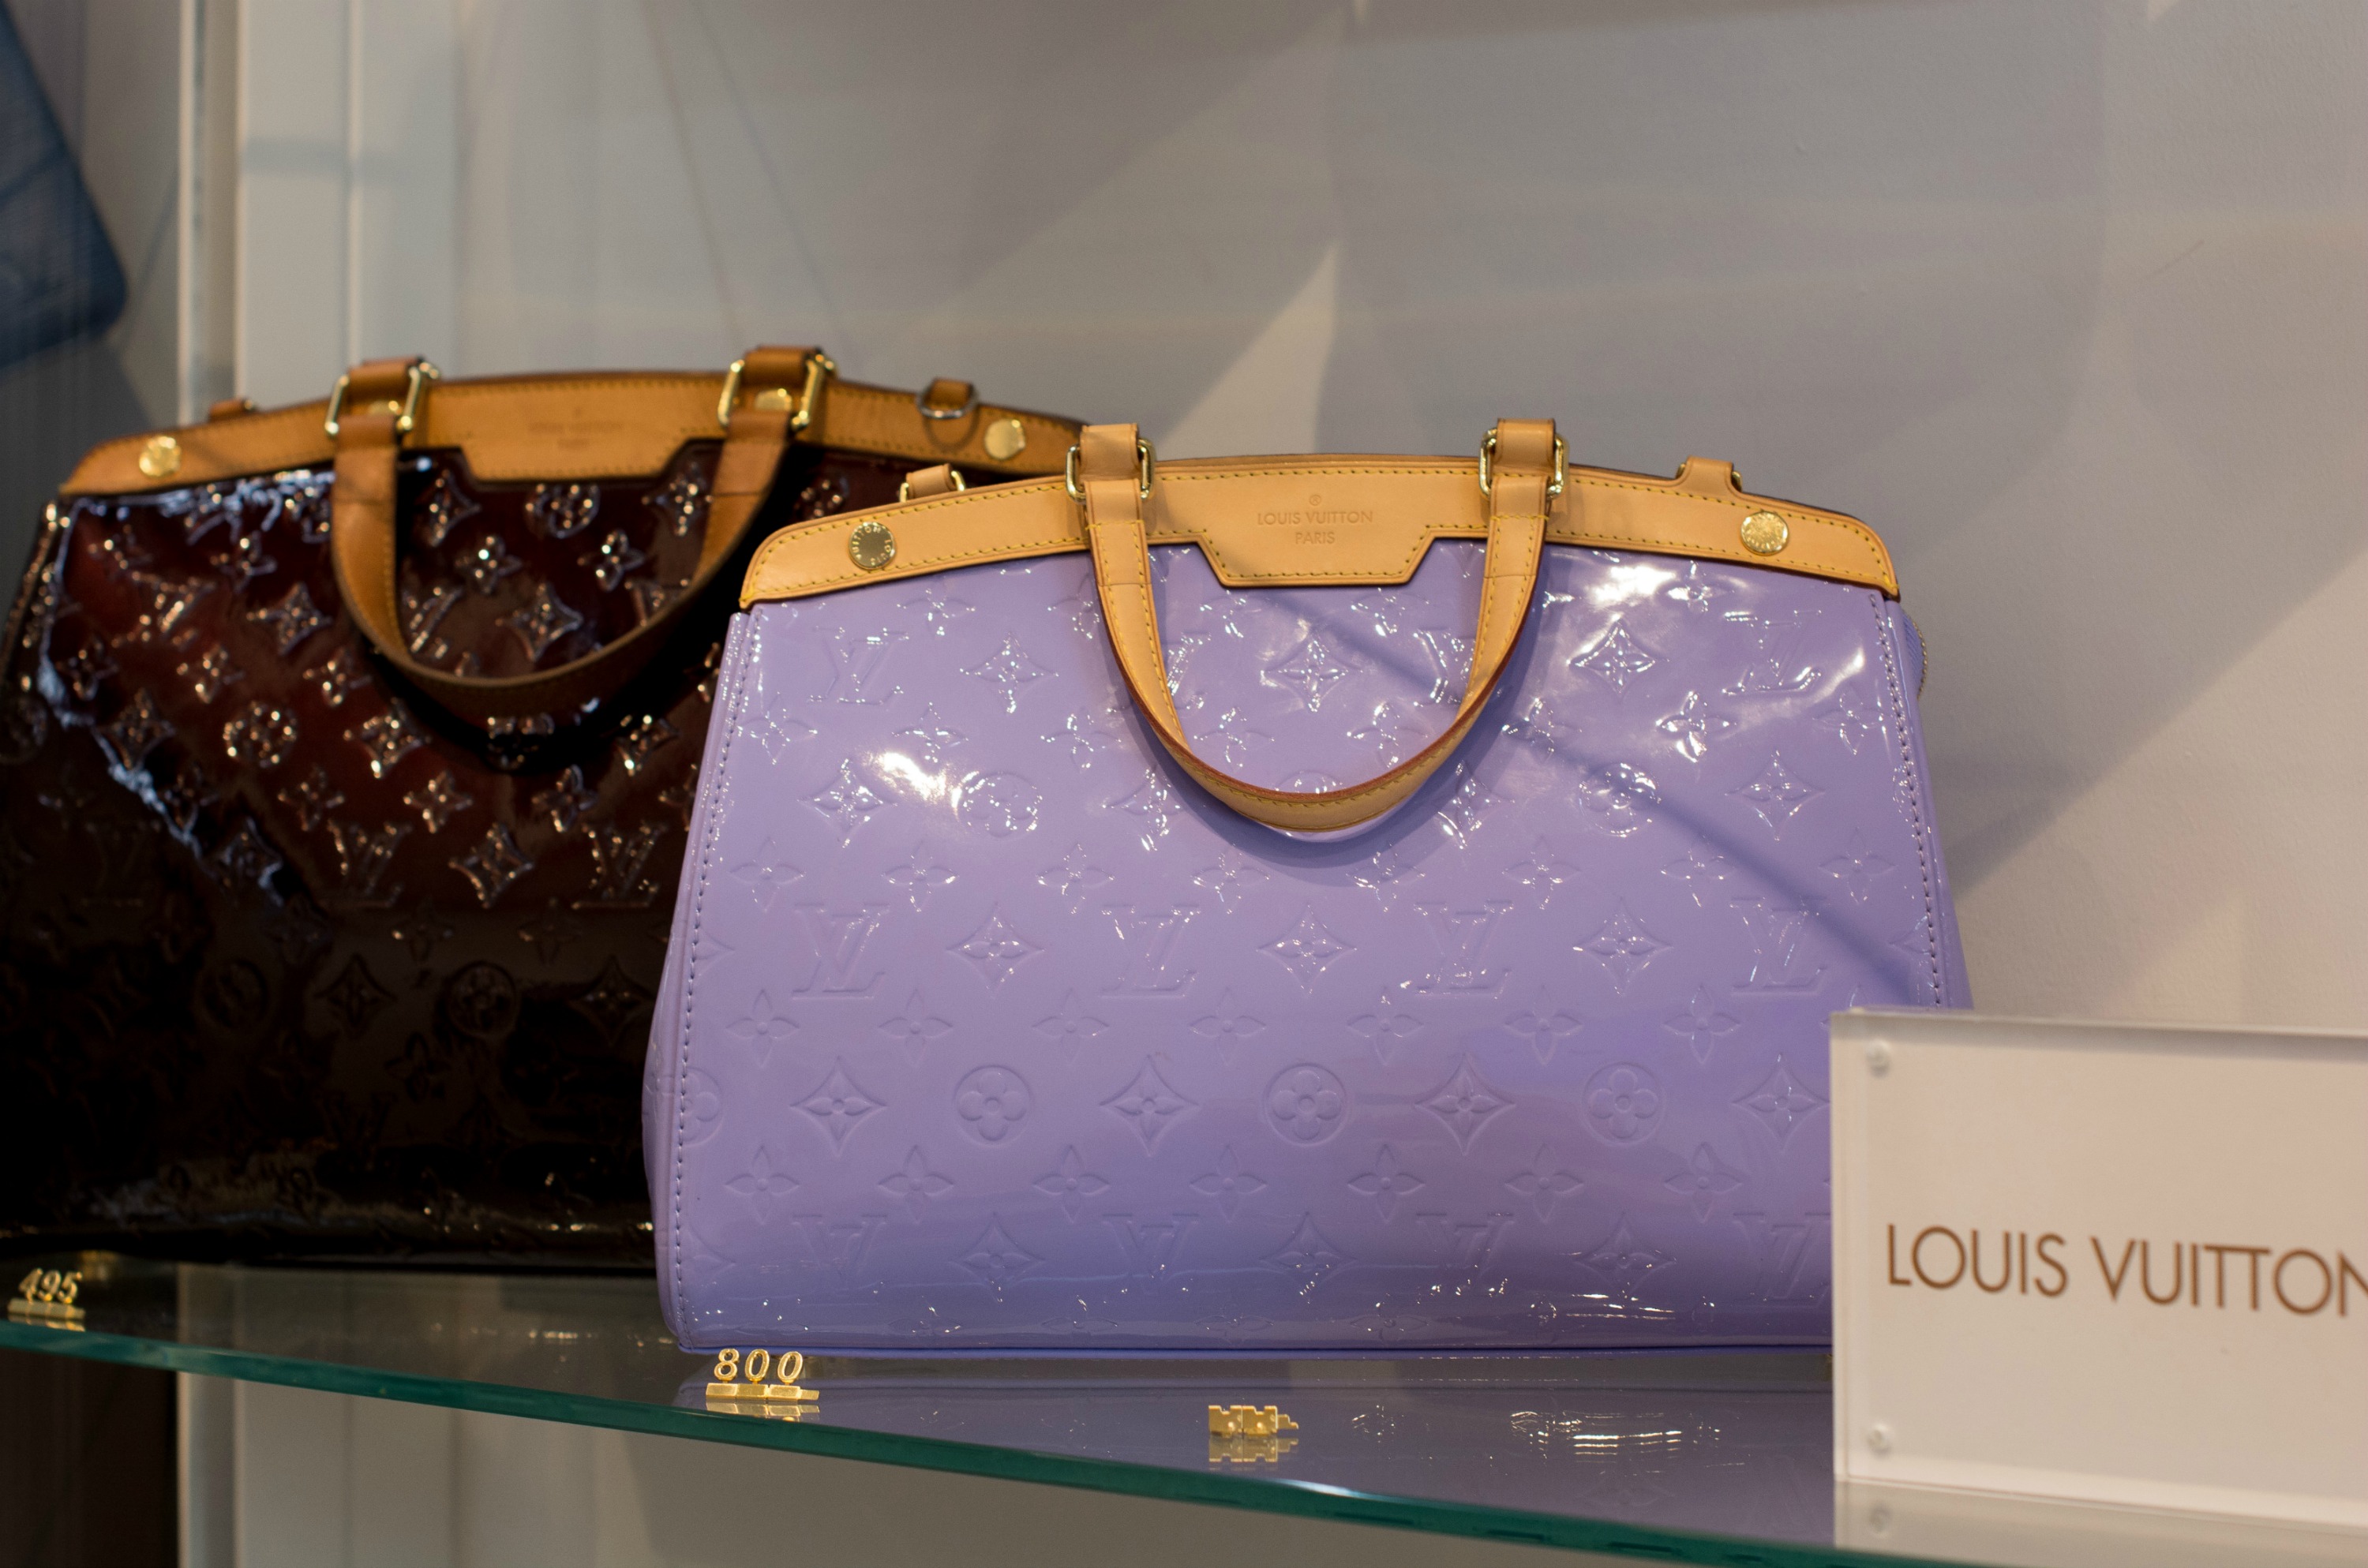 Pre-owned & Second hand Louis Vuitton Handbags.